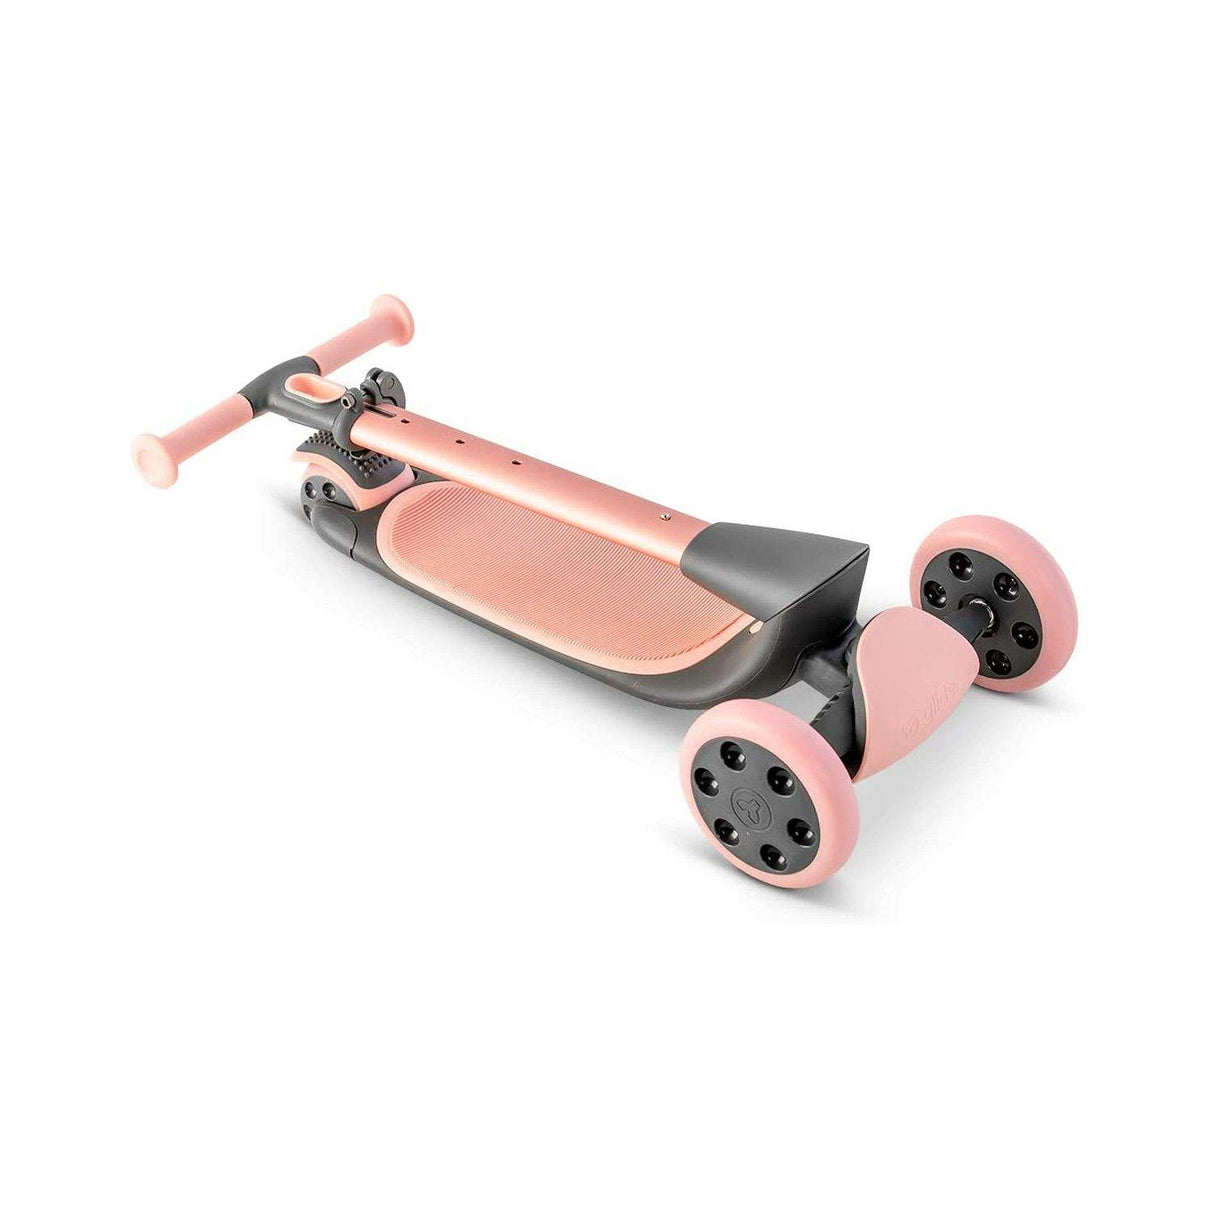 Yvolution Y Glider Nua Foldable Kick Scooter